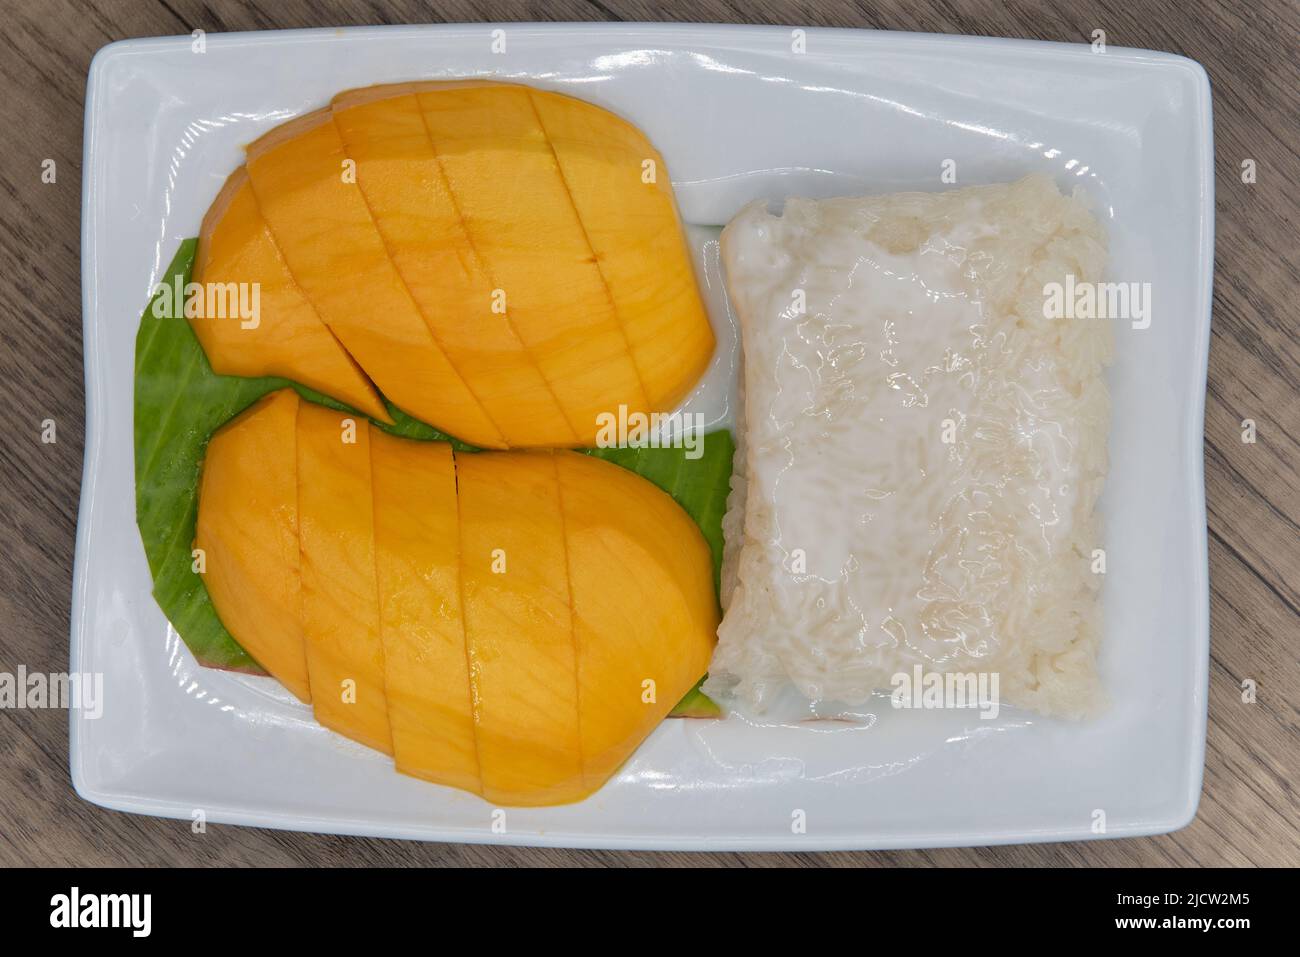 Overhead view of tempting combination plate of sliced mango served with sweet sticky rice. Stock Photo